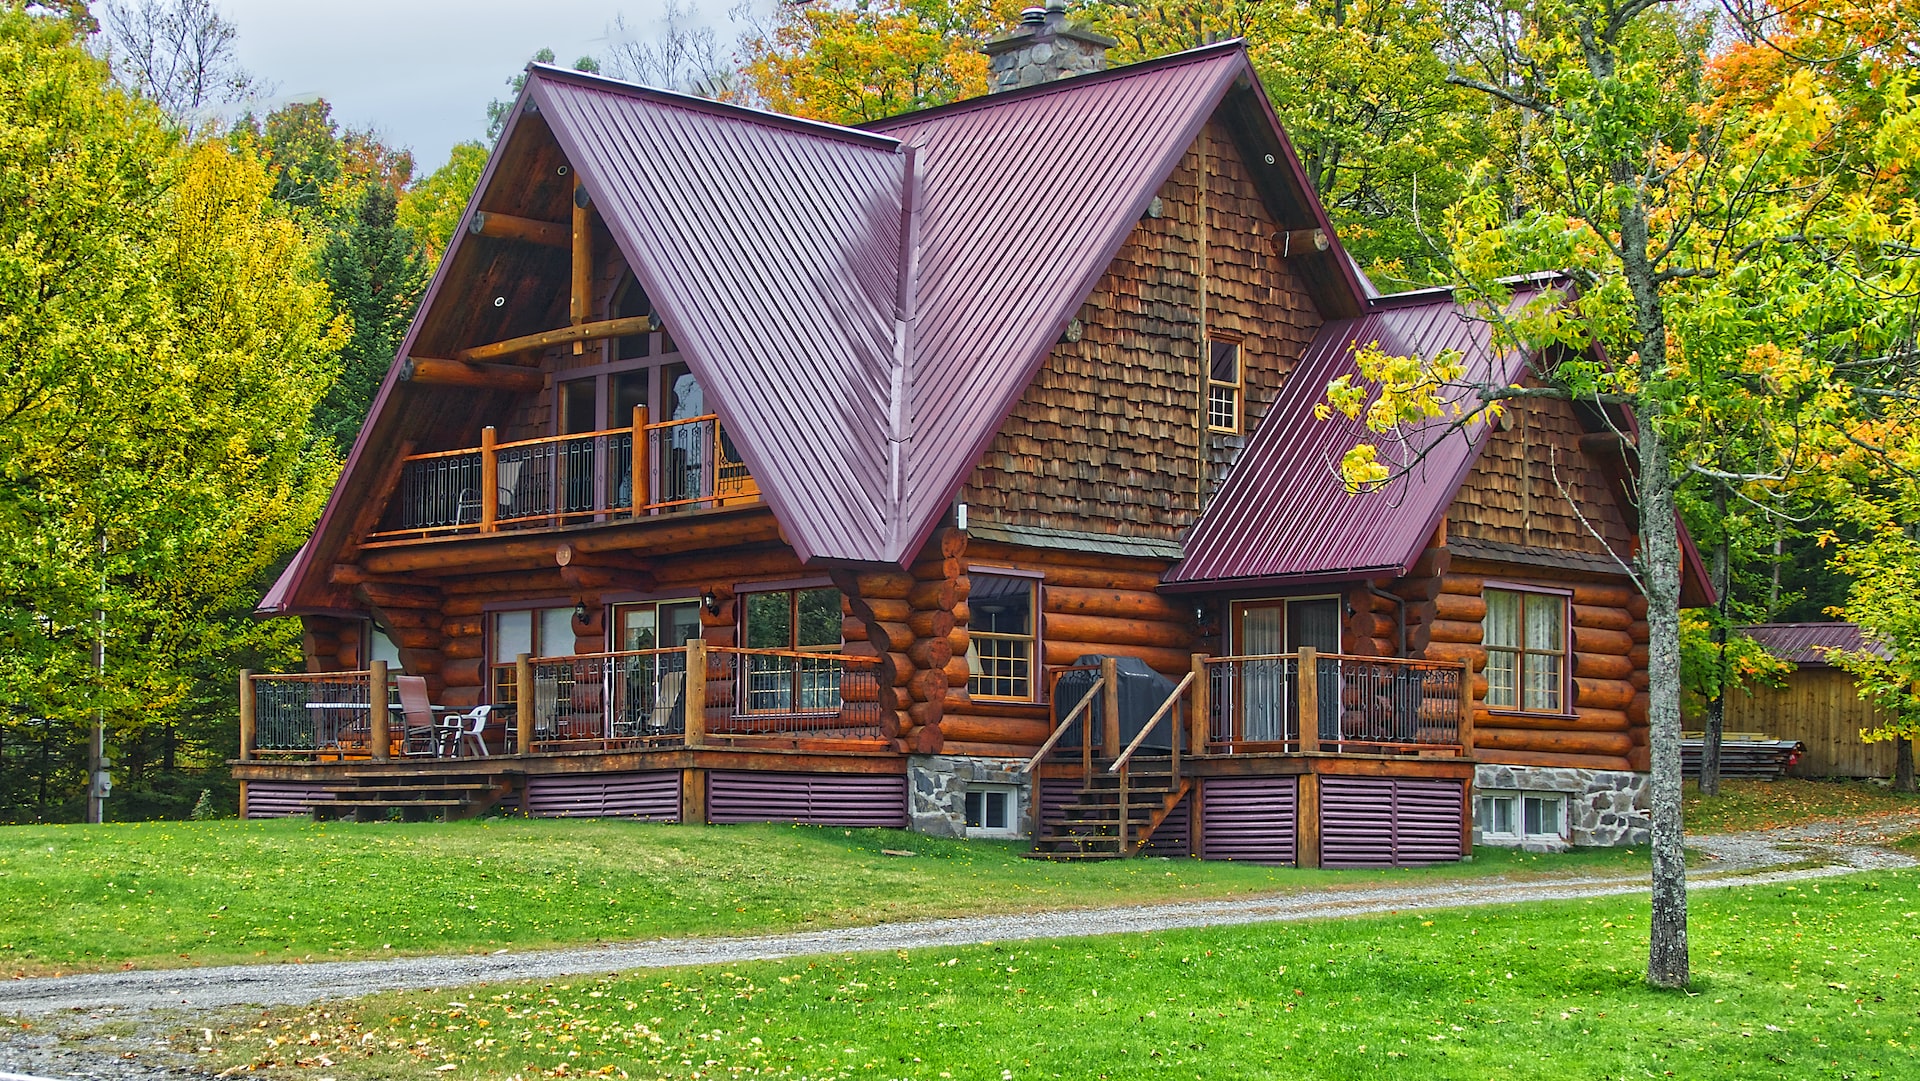 Benefits of Staying in a Log Cabin